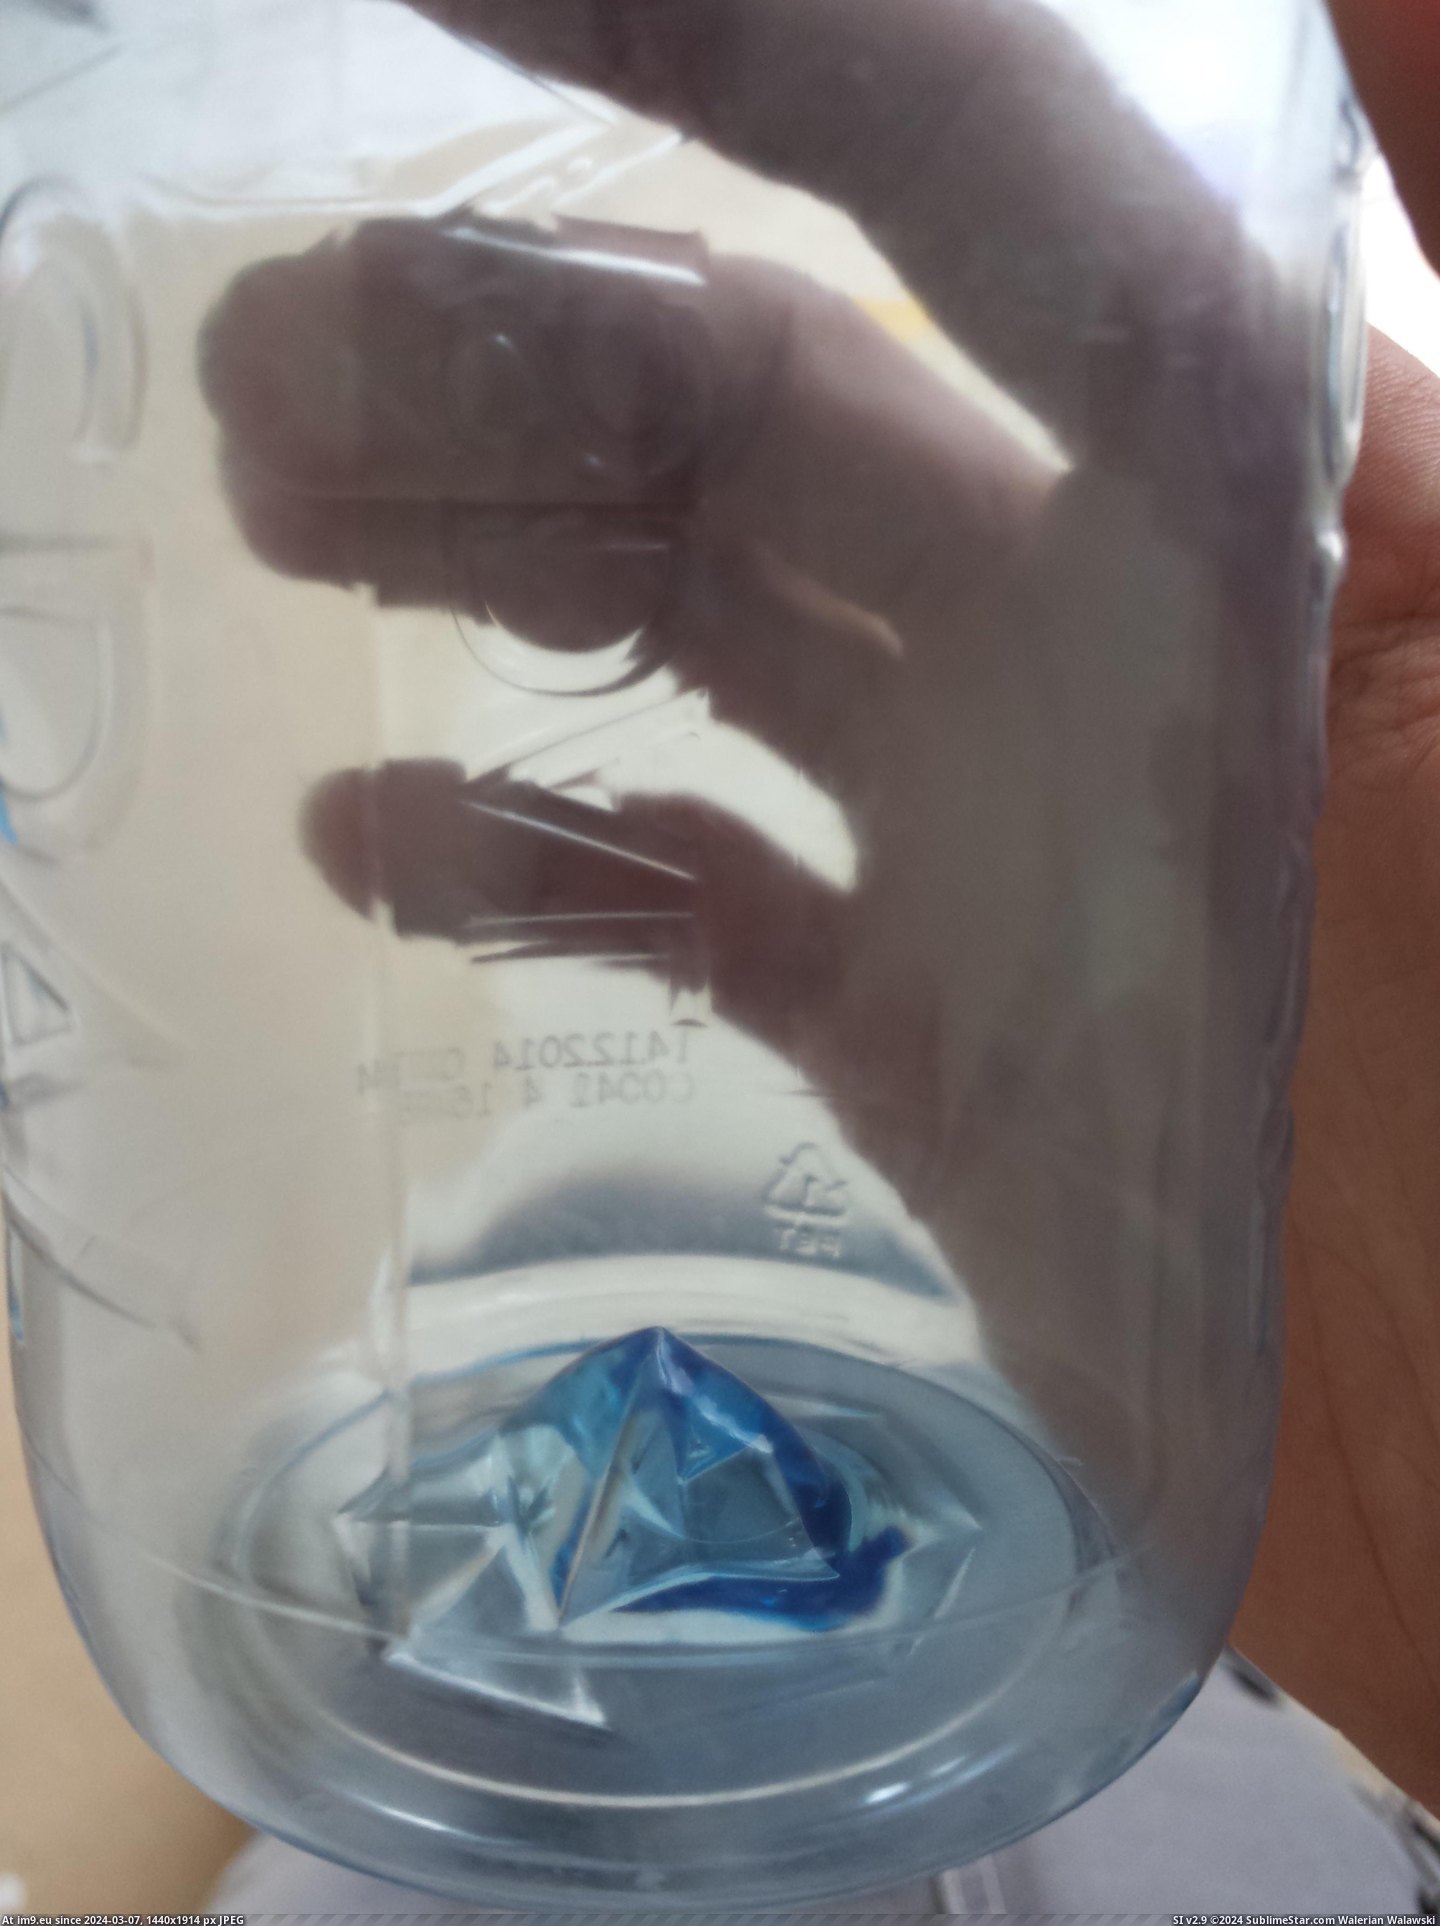 #Water #Mountain #Shaped #Bottle #Bottom [Mildlyinteresting] The bottom of this water bottle is shaped like the mountain which the water is from Pic. (Image of album My r/MILDLYINTERESTING favs))